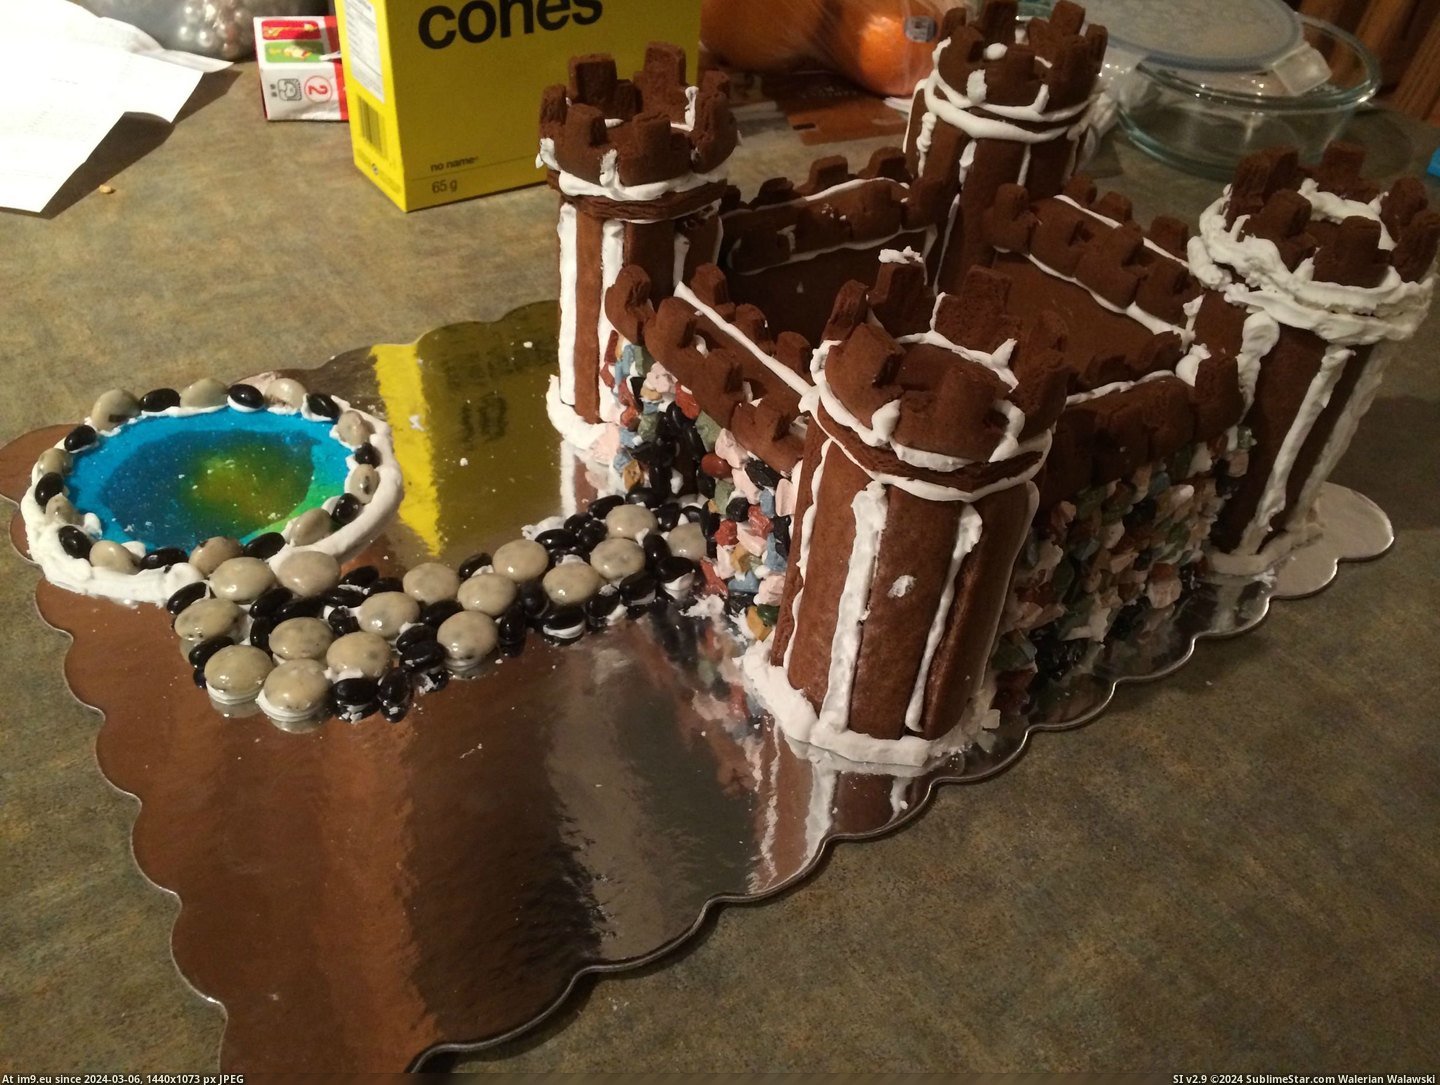 #Husband #Get #Our #Divorced #Collaborated #Project #Gingerbread #Success [Pics] My husband and I collaborated on our first gingerbread project and didn't get divorced...success! 12 Pic. (Image of album My r/PICS favs))